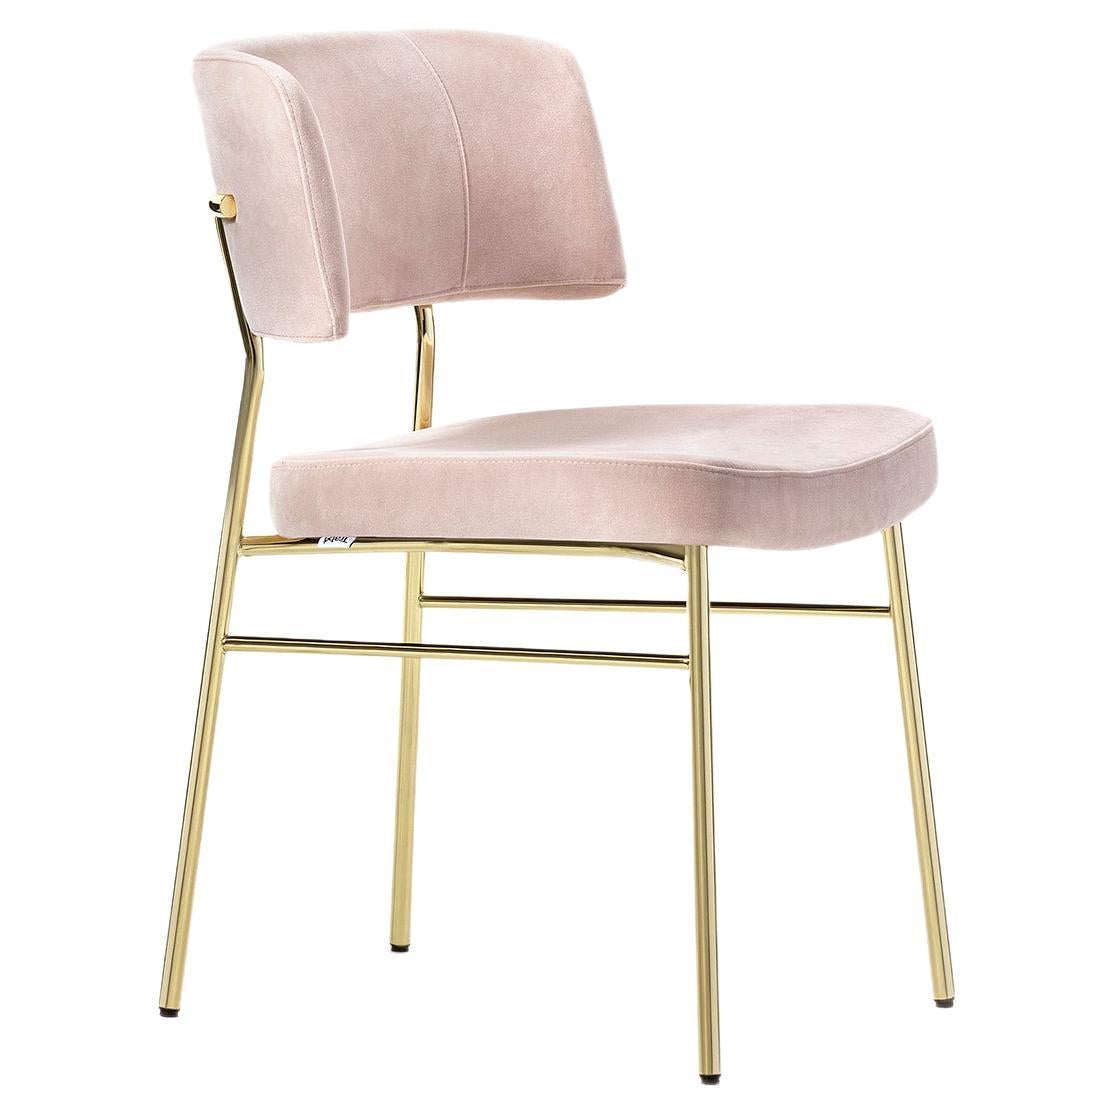 Chaise Marlene 0161, Rose, Indoor, Chaise, Laiton brillant, Home, Contract, Living